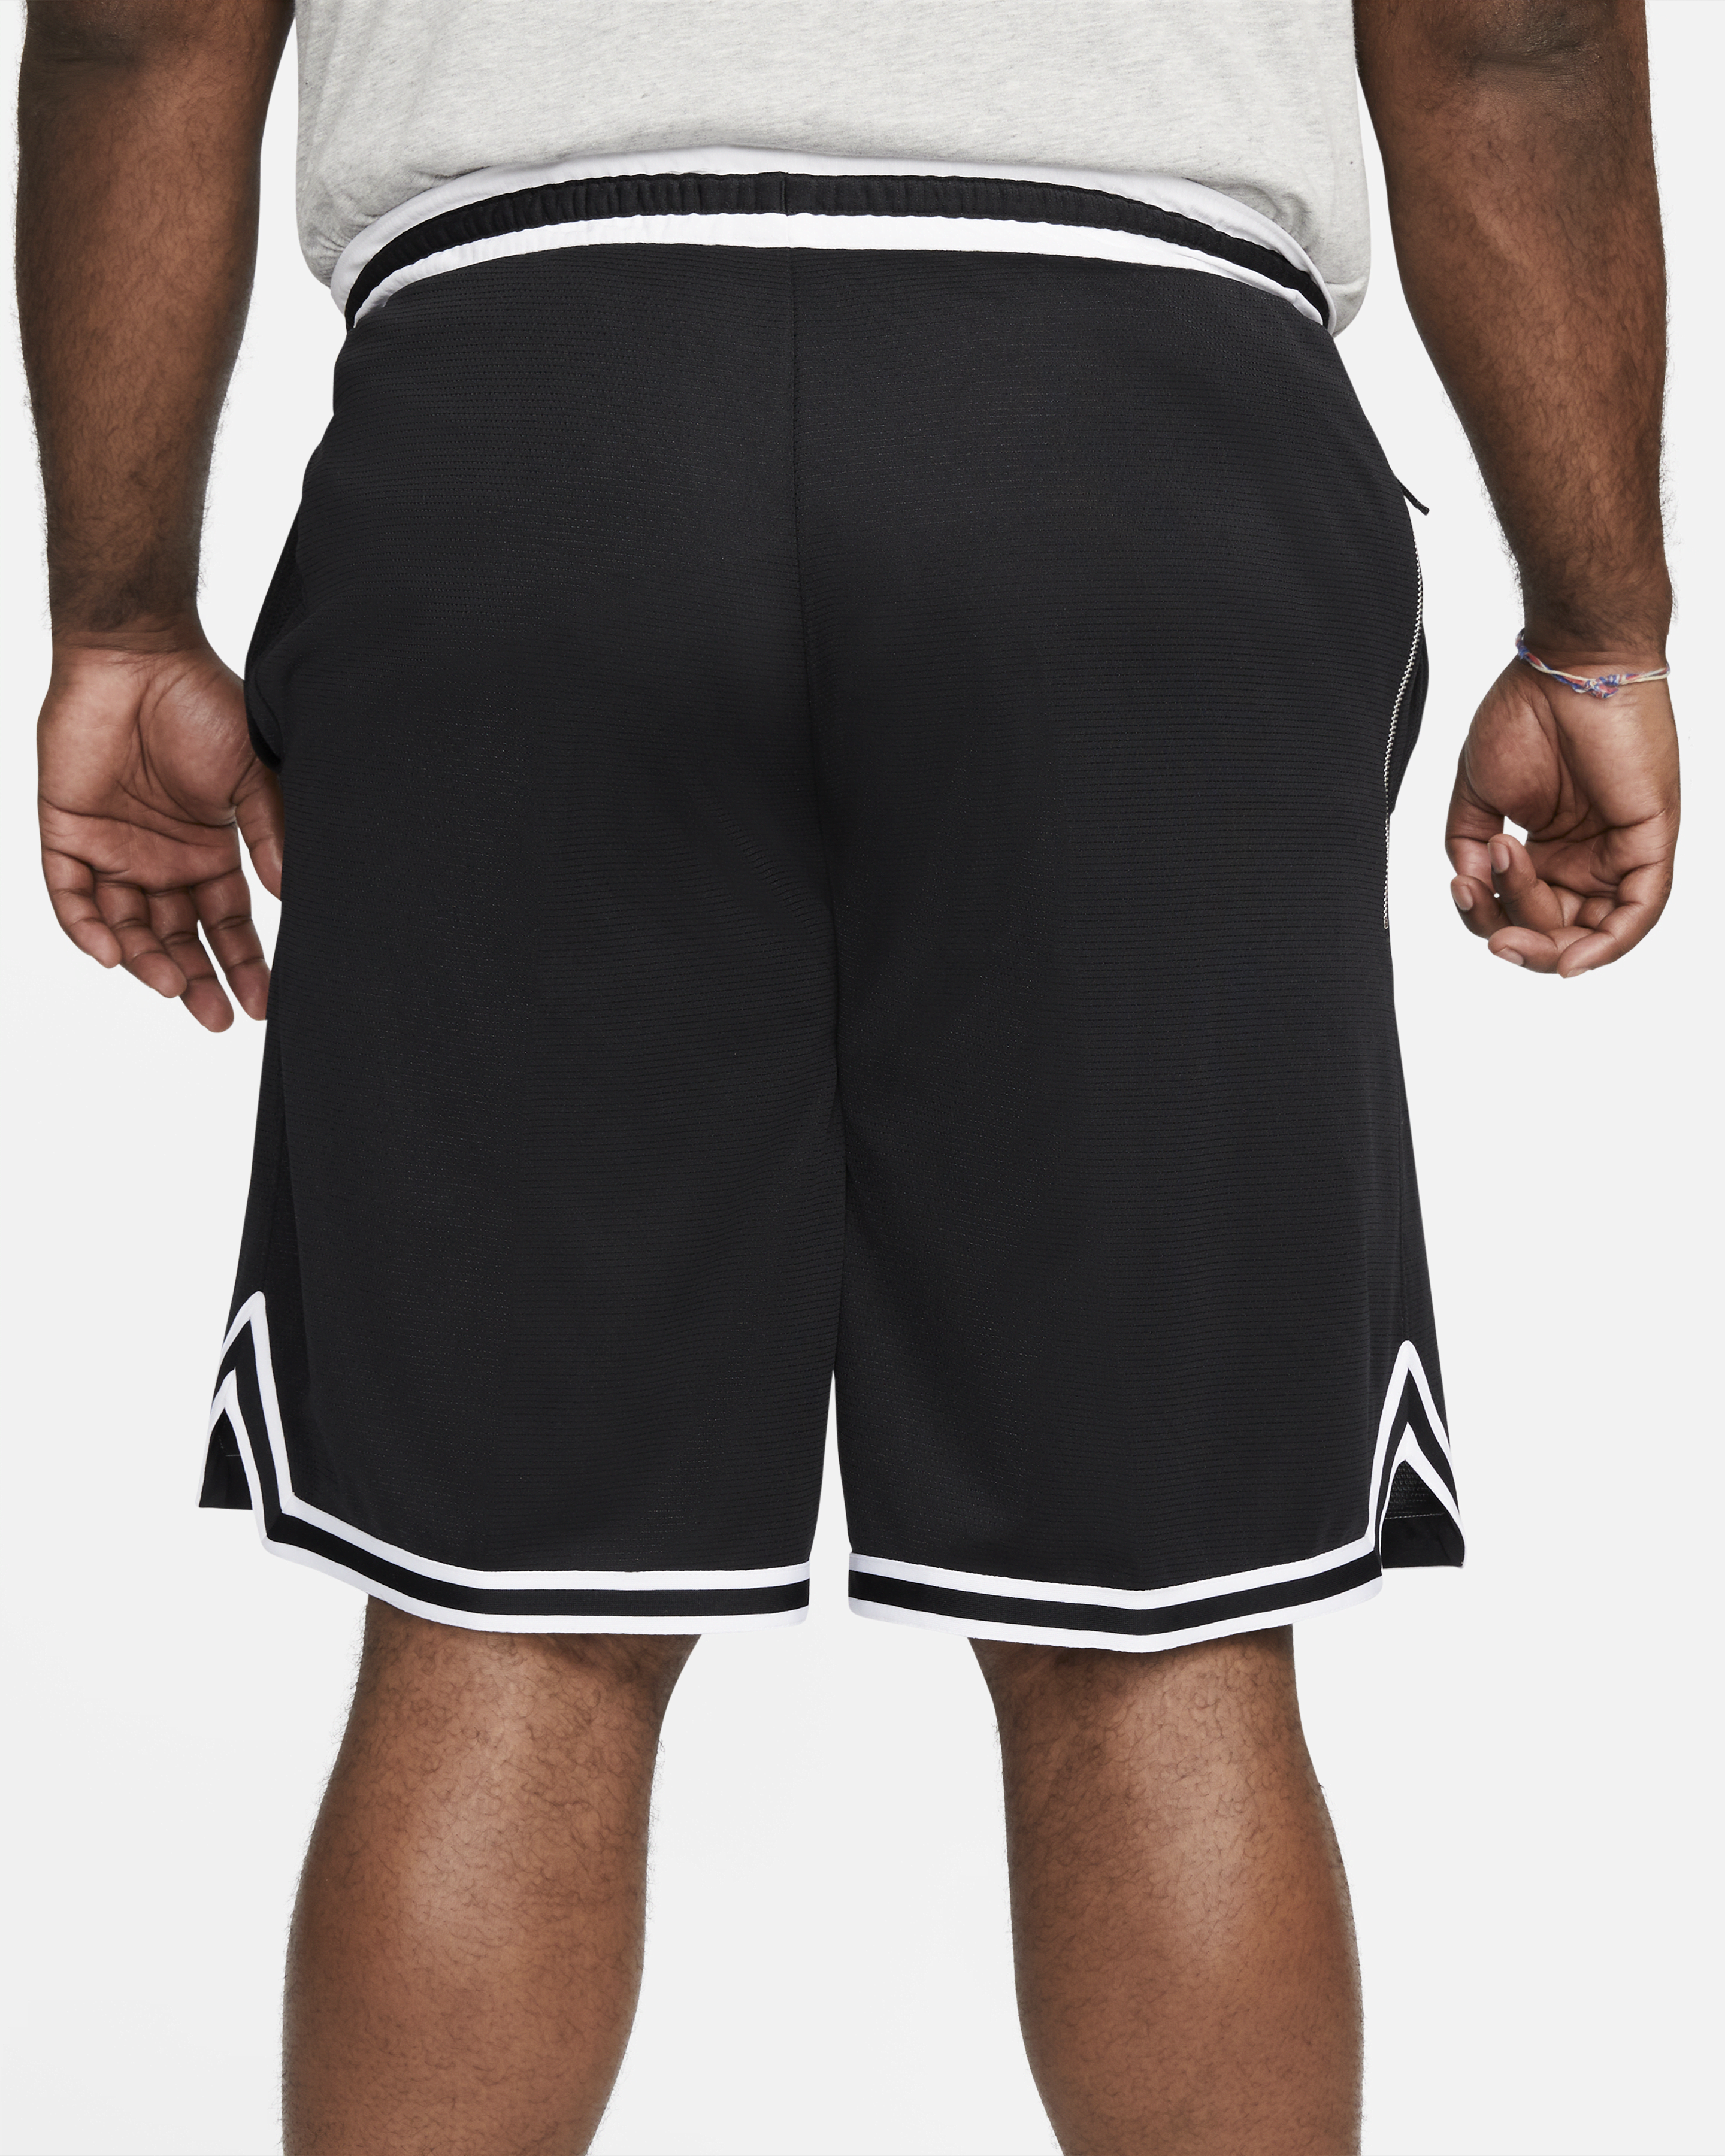 Best Short Shorts For Basketball Stars  International Society of Precision  Agriculture